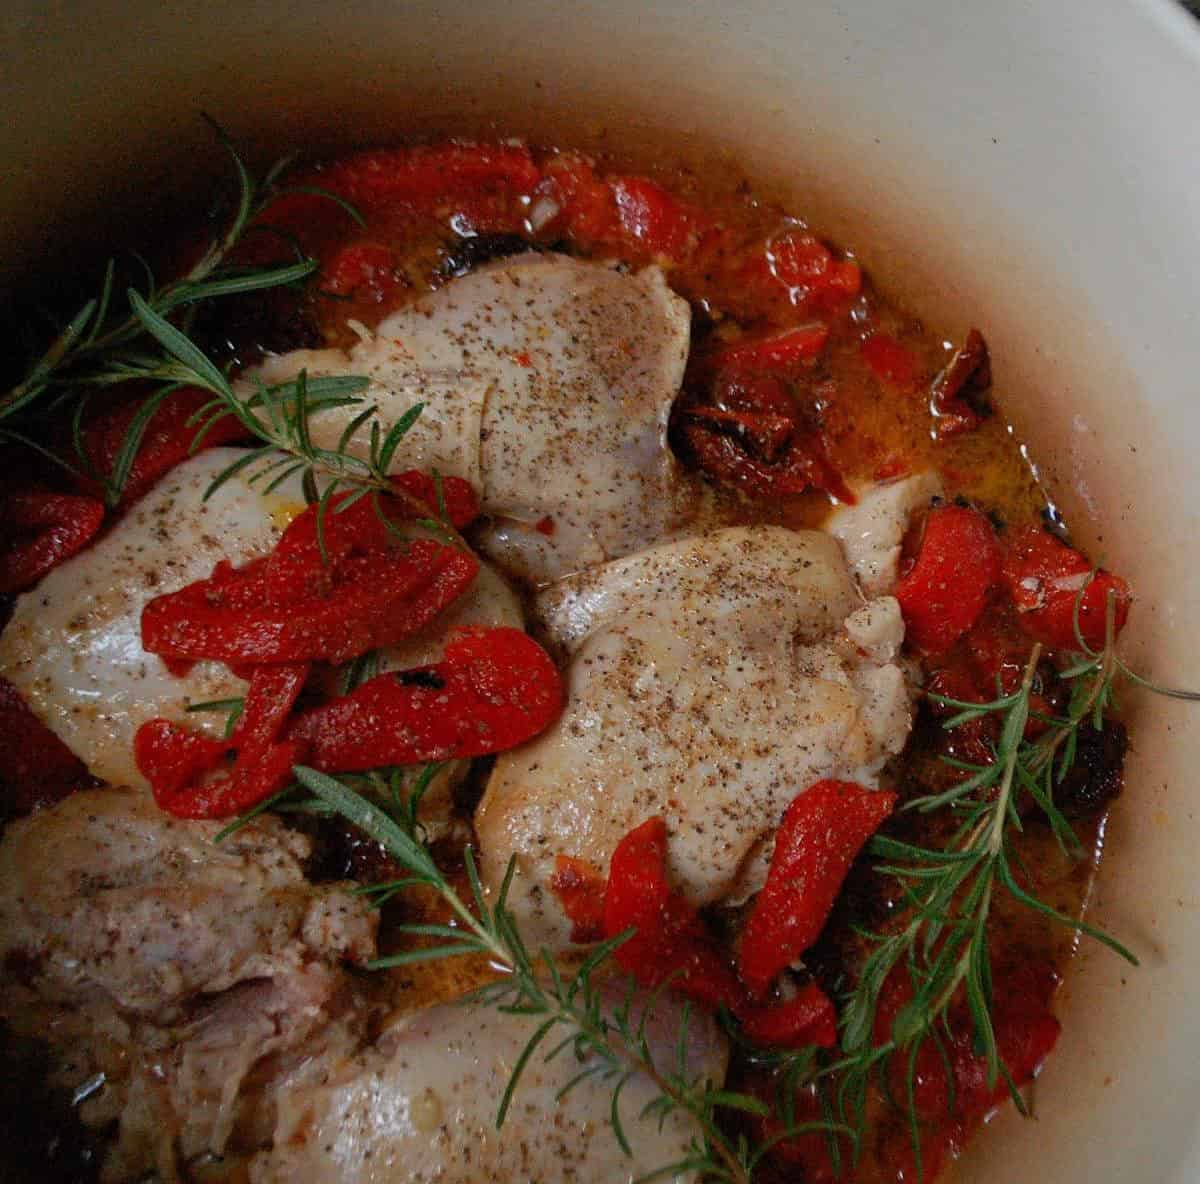  Your kitchen will feel like a Tuscan villa with this delicious Corsican chicken cooking away in the slow cooker.